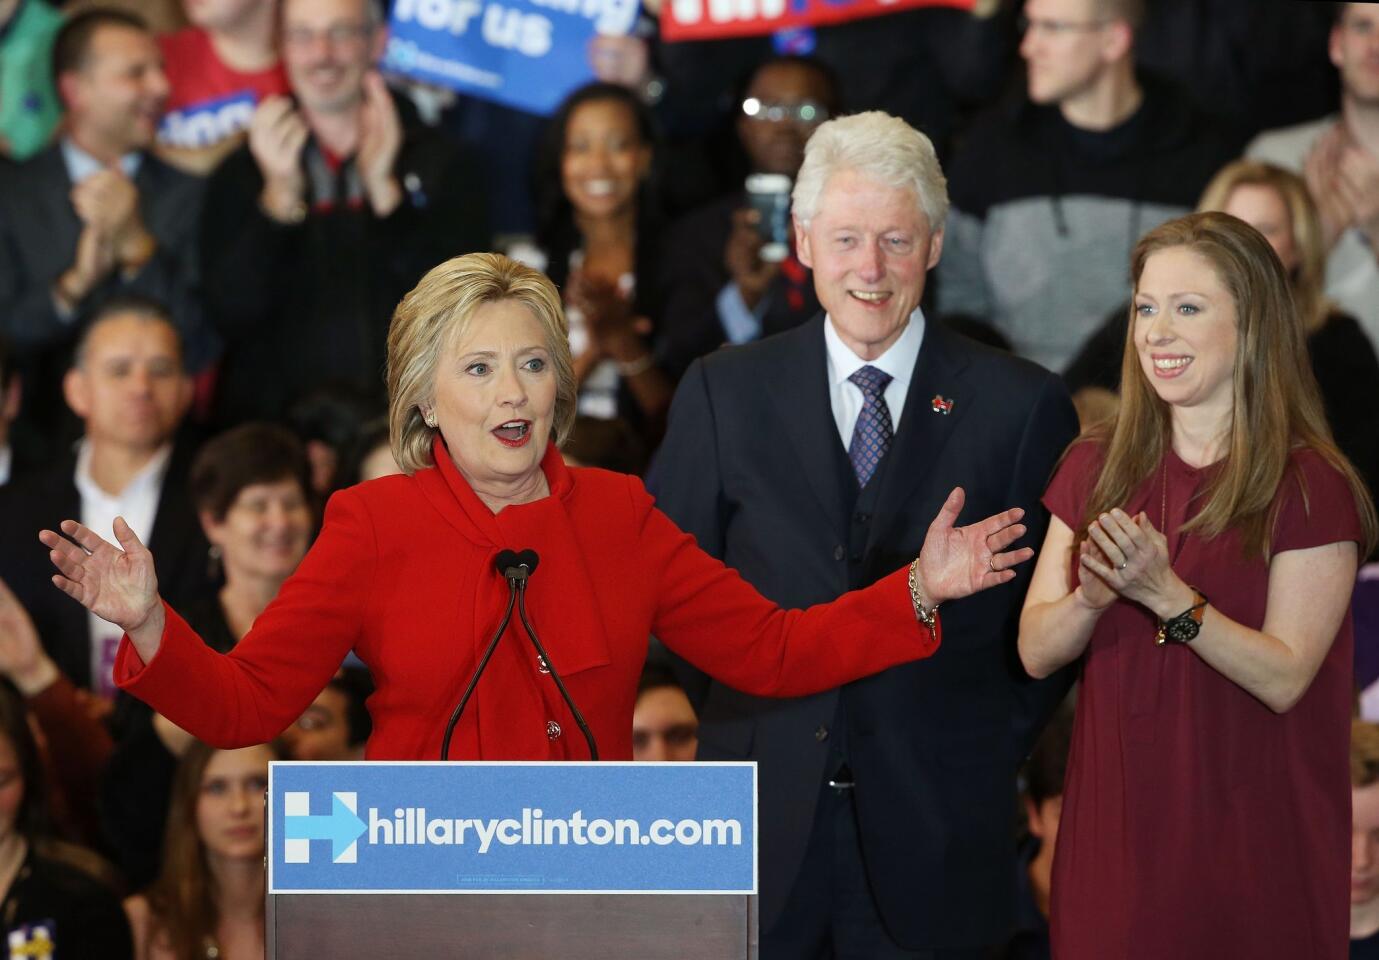 Democratic presidential candidate former Secretary of State Hillary Clinton speaks to supporters as Former U.S. president Bill Clinton and daughter Chelsea Clinton look on during her caucus night event in the Olmsted Center at Drake University in Des Moines, Iowa.